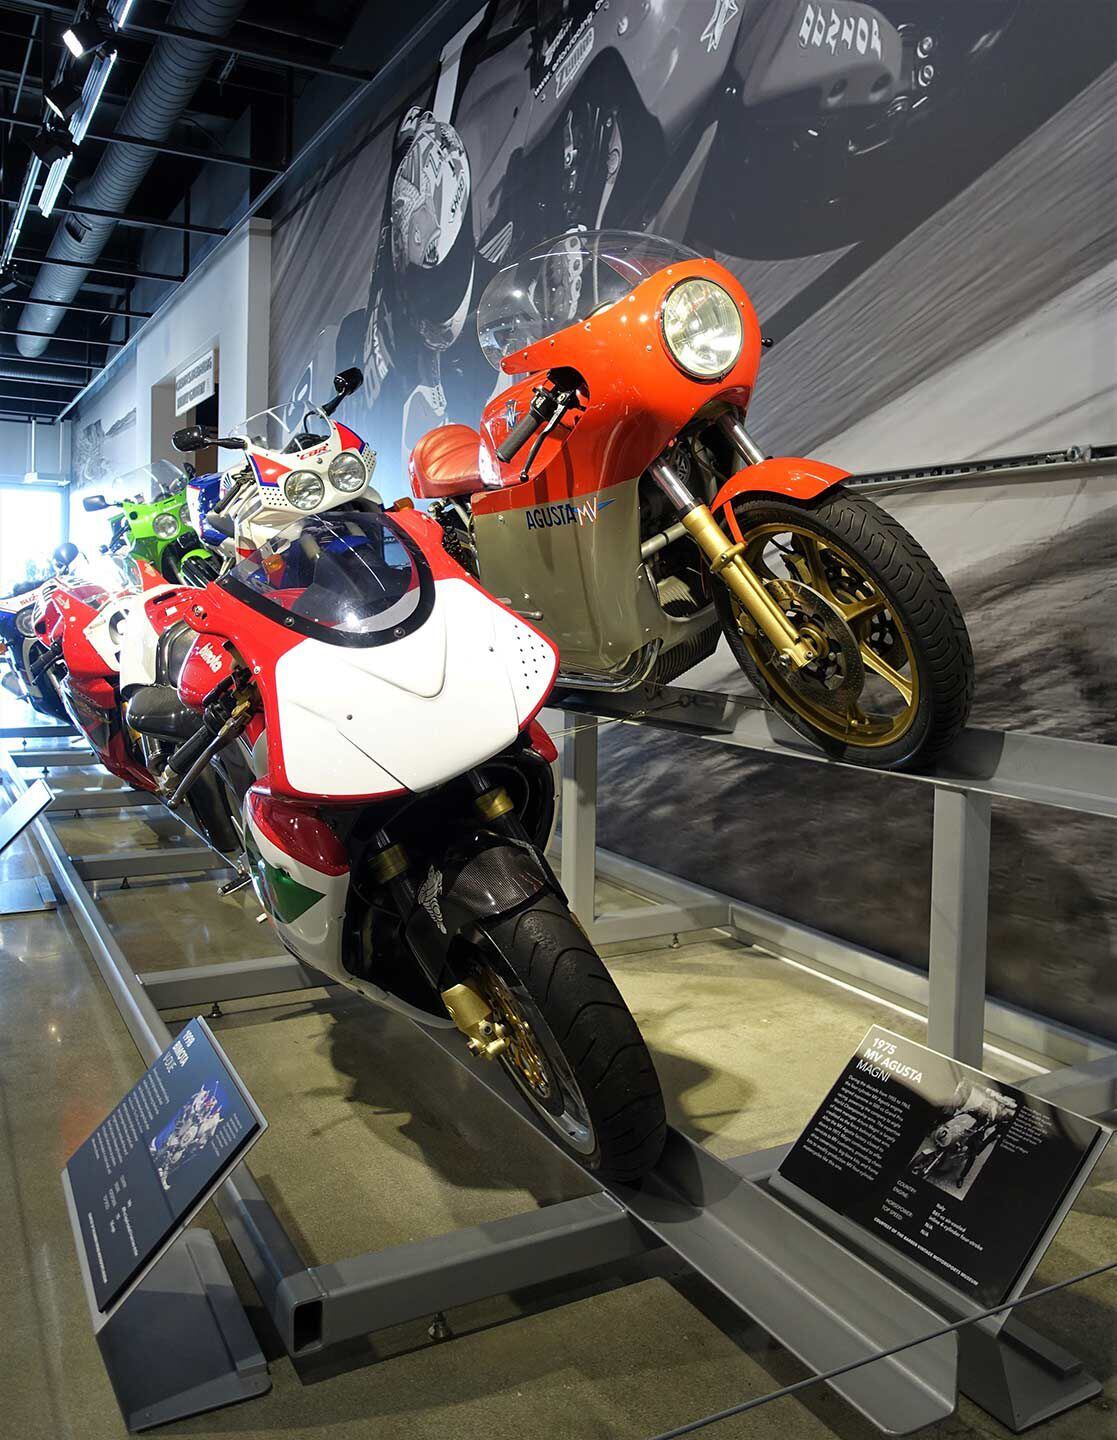 Classy Italians: the 1998 Bimota V-Due, introduced as the first production two-stroke motorcycle with electronically controlled direct fuel injection, and the 1975 four-cylinder MV Agusta Magni, named after MV race team manager Arturo Magni.